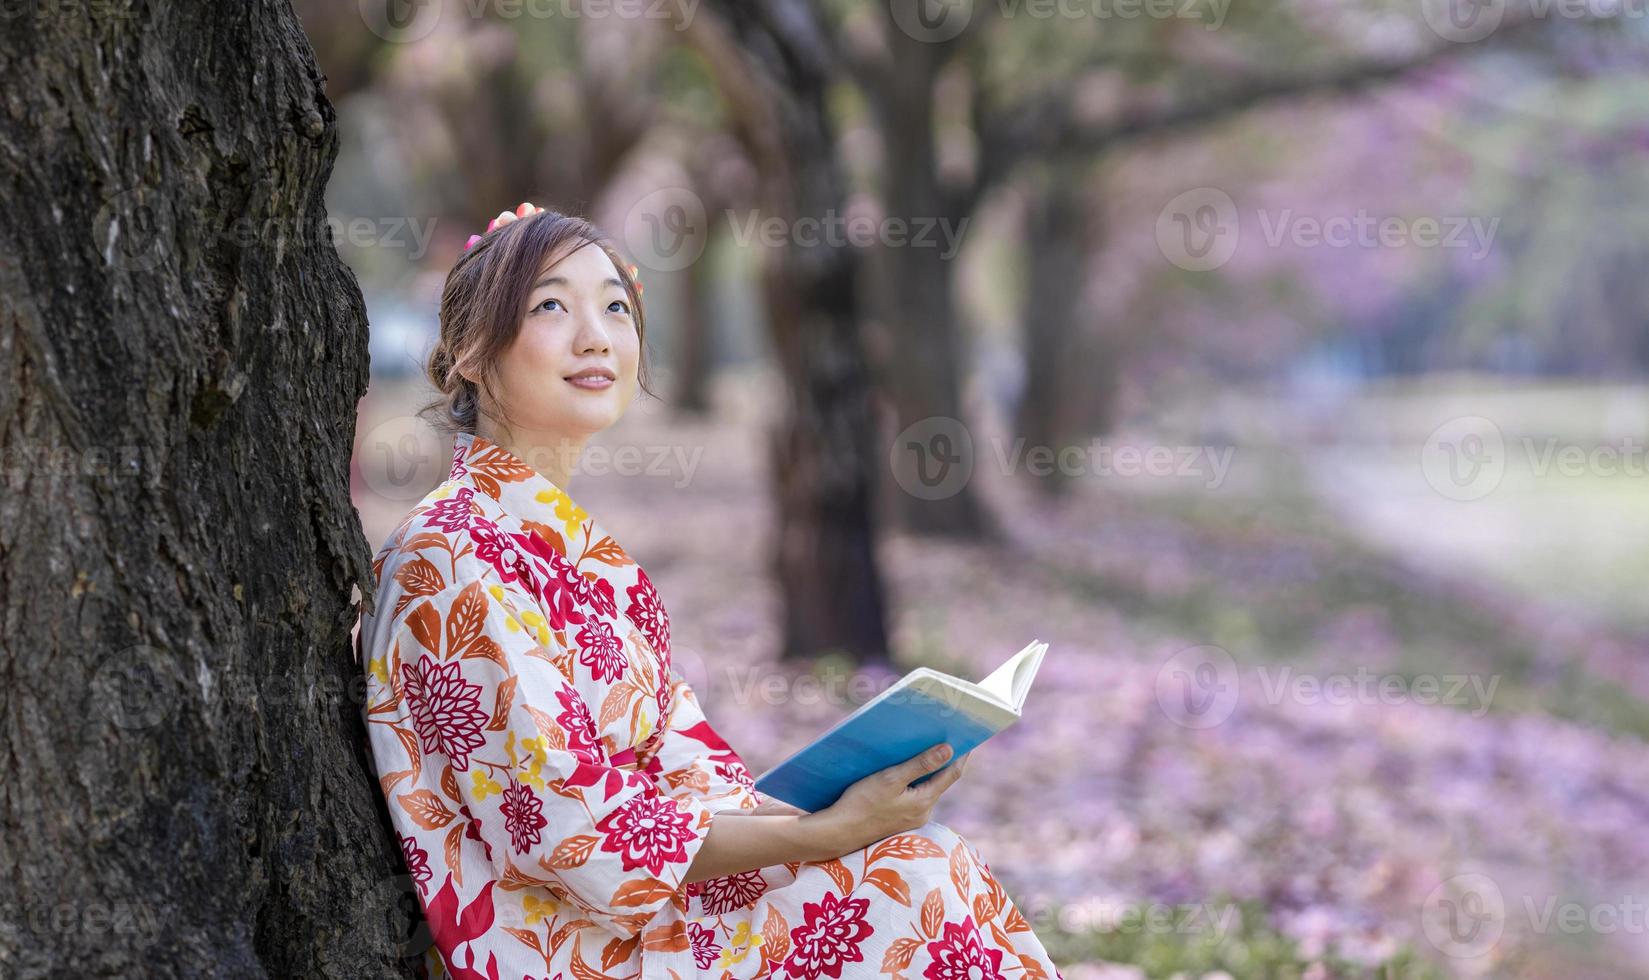 Japanese woman in traditional kimono dress sitting under cherry blossom tree while reading a book during spring sakura festival concept photo